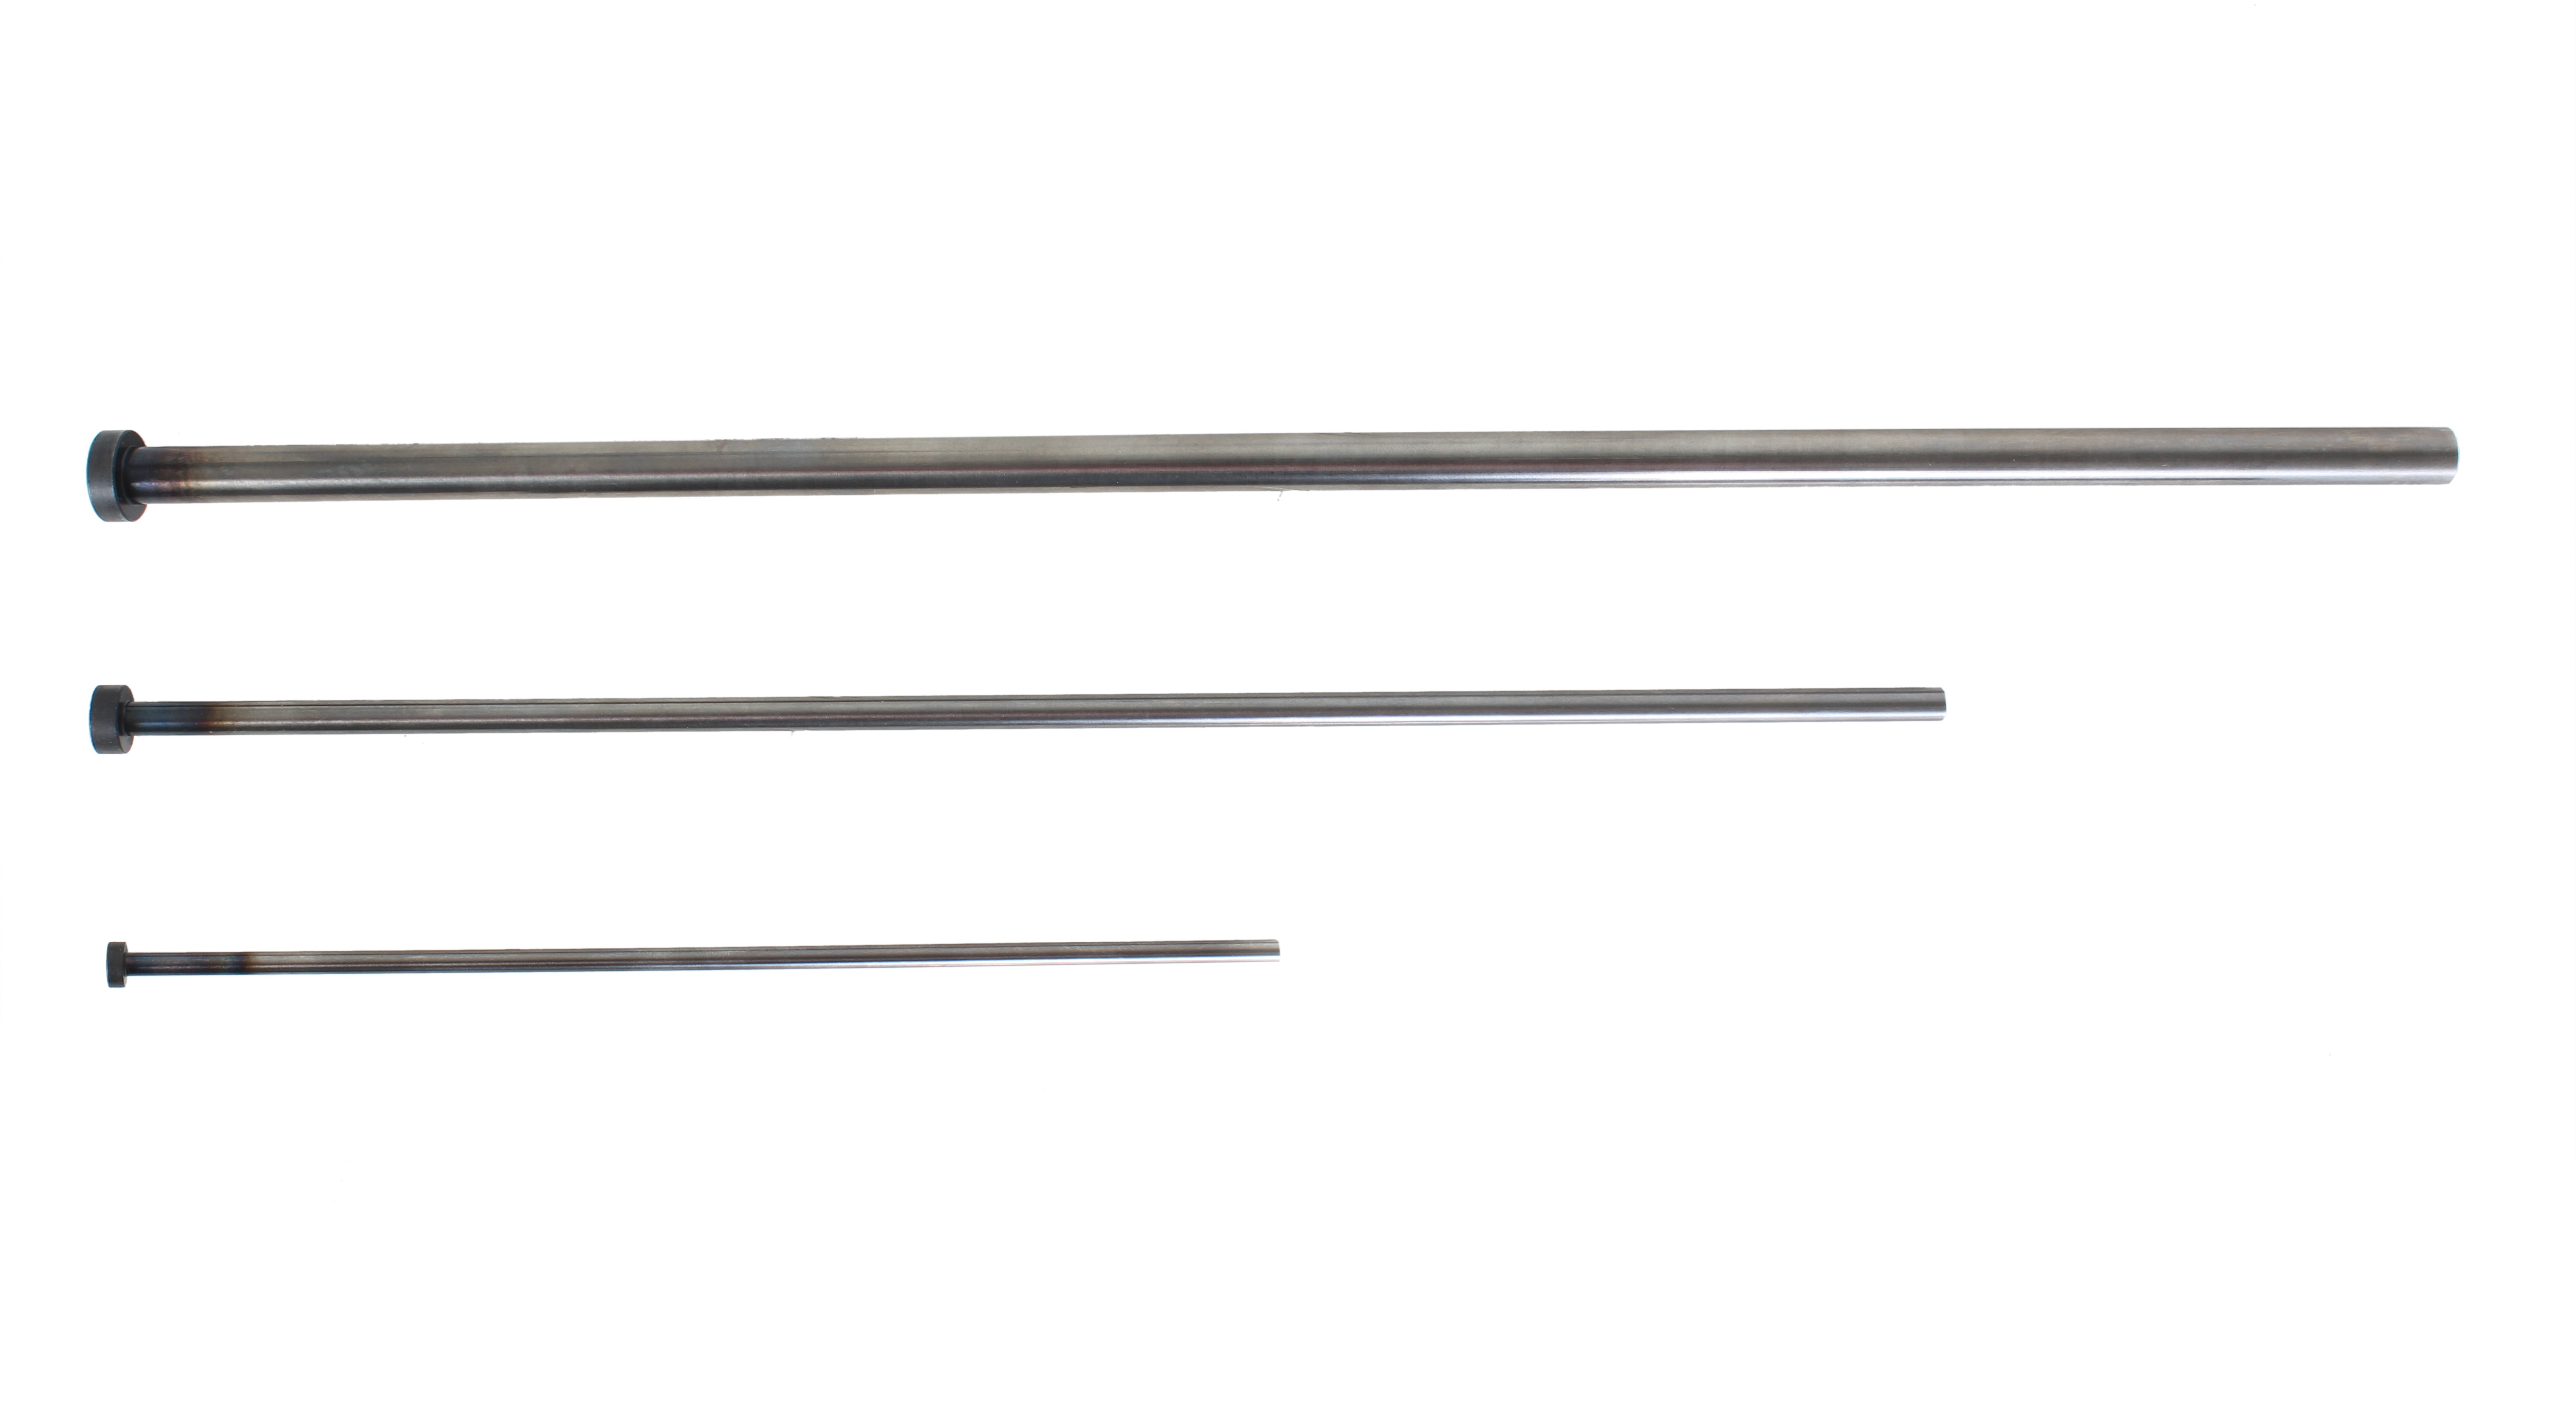 STRAIGHT EJECTOR PINS -DIN Type/SKD61 equivalent+Nitrided/Standard- (D-EPN7-125) 